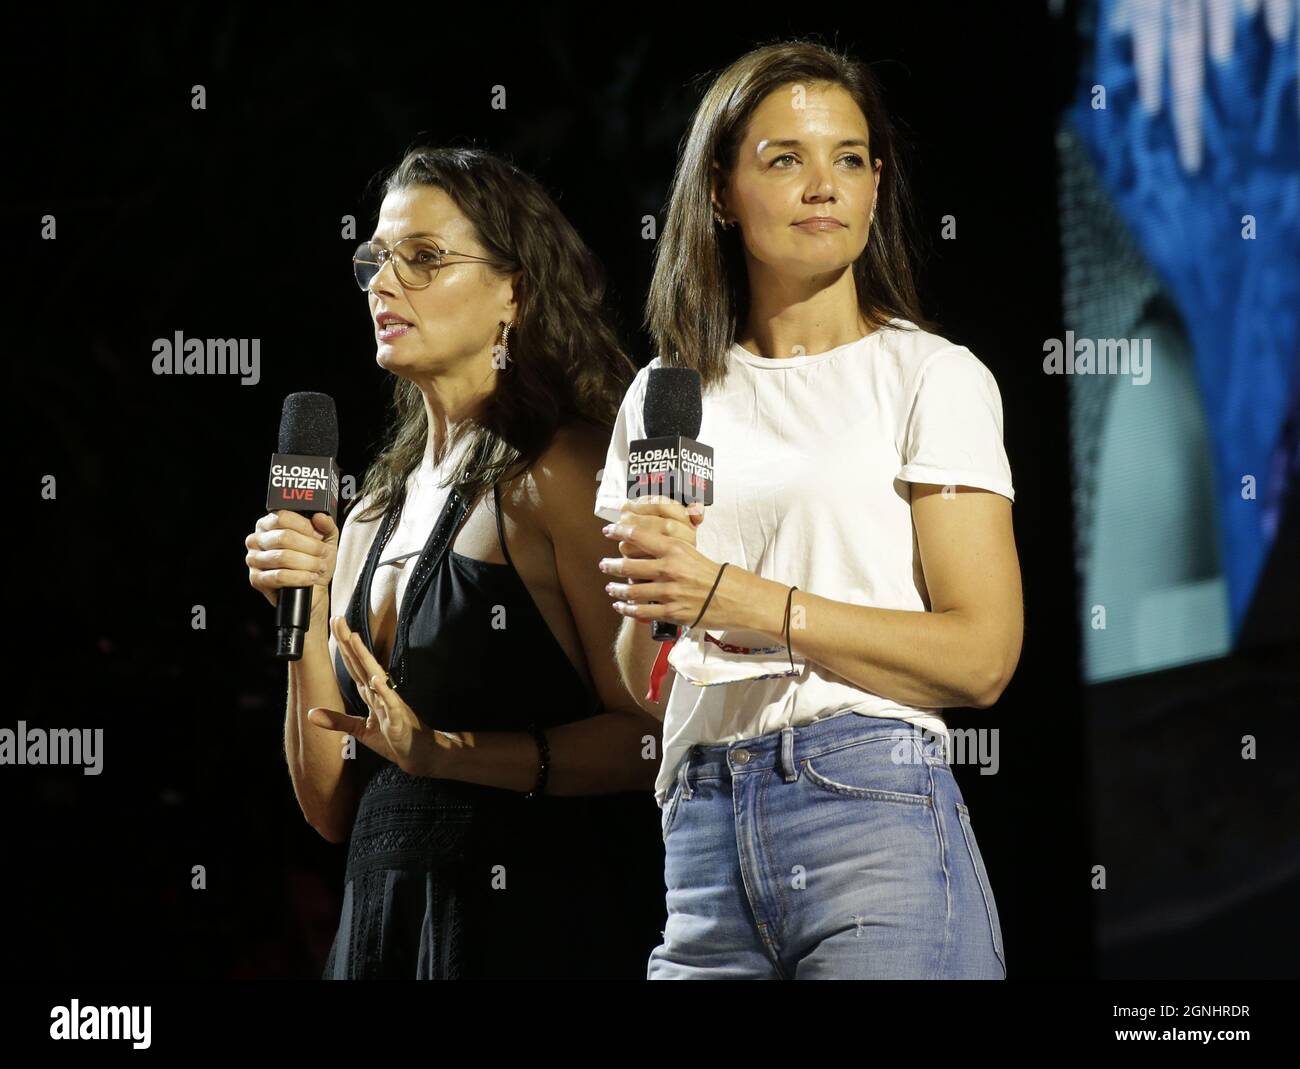 New York, United States. 26th Sep, 2021. Bridget Moynahan and Katie Holmes speak at Global Citizen Live in New York City on Saturday, September 25, 2021. Global Citizen Live is a 24-hour global event starting on September 25 to unite the world to defend the planet and defeat poverty. Photo by John Angelillo/UPI Credit: UPI/Alamy Live News Stock Photo